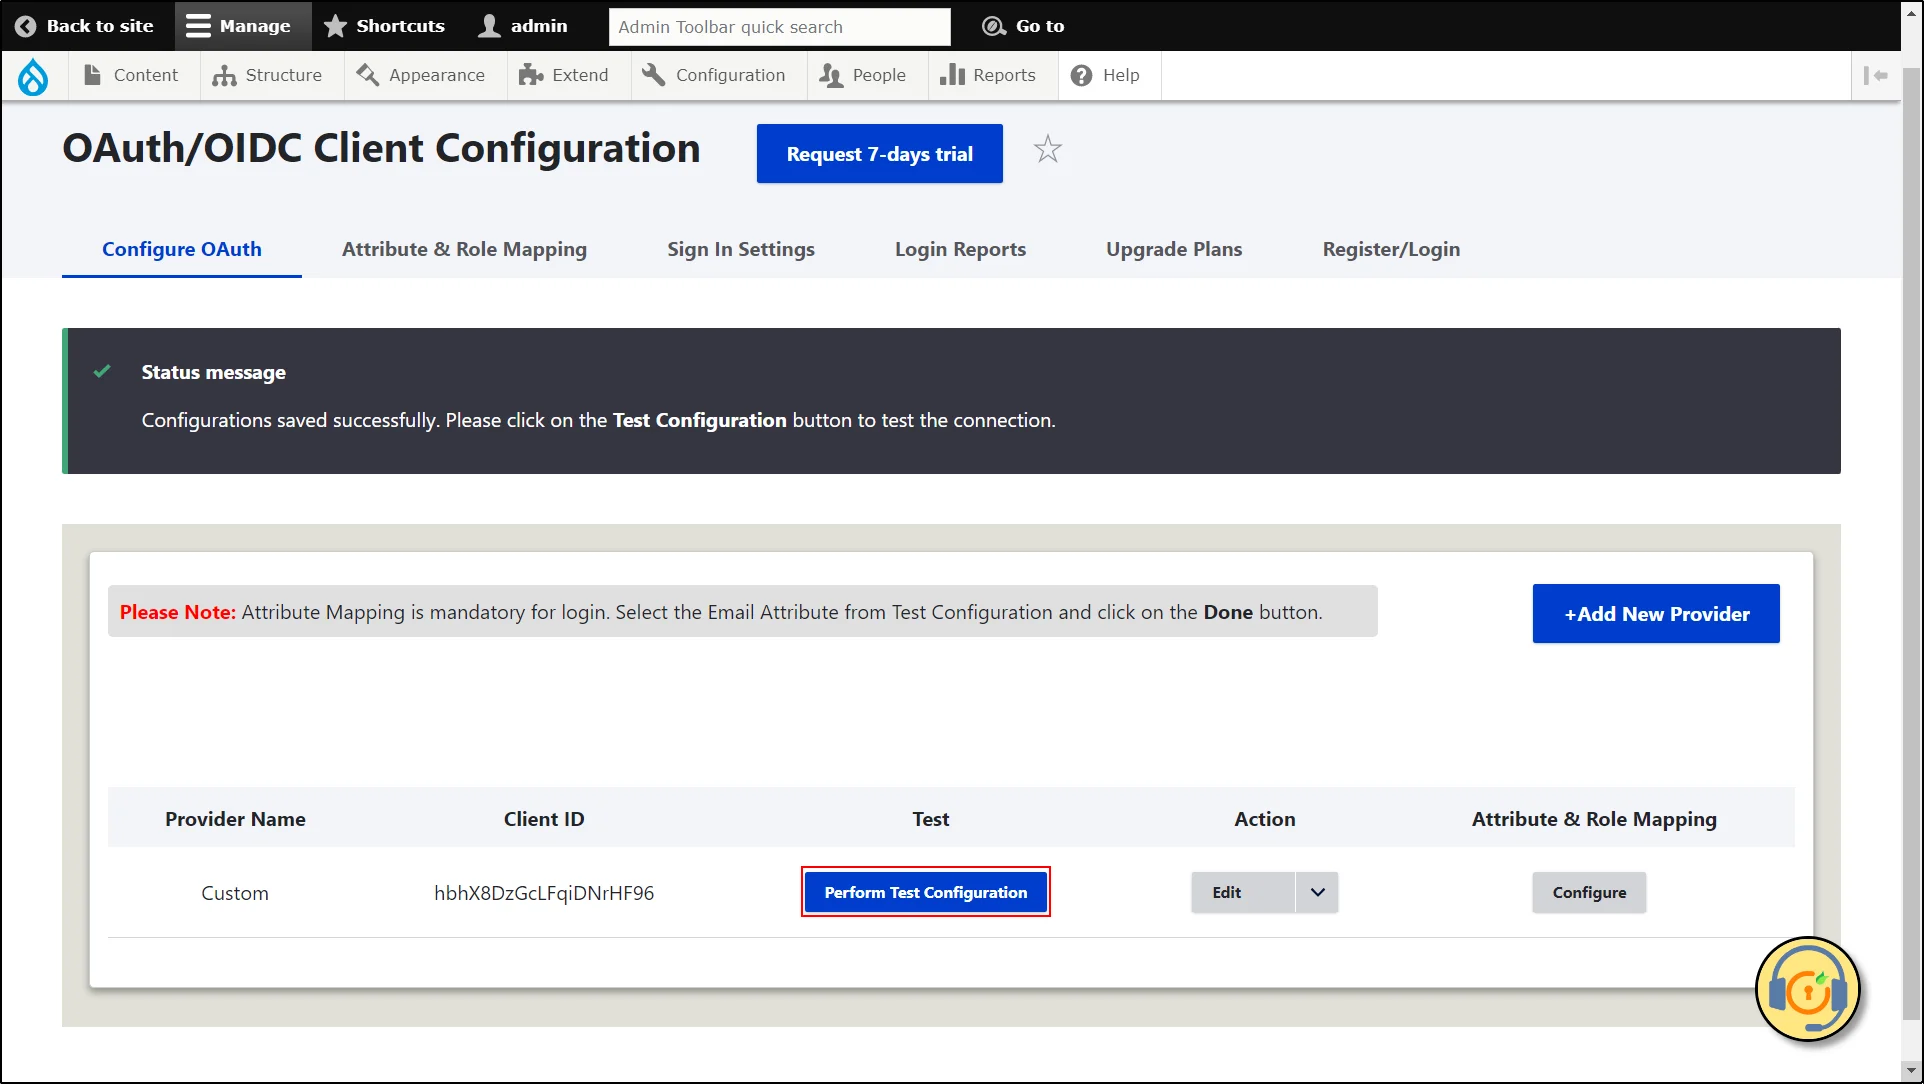  Drupal as OAuth/OpenID Connect Login - Click on Perform Test Configuration